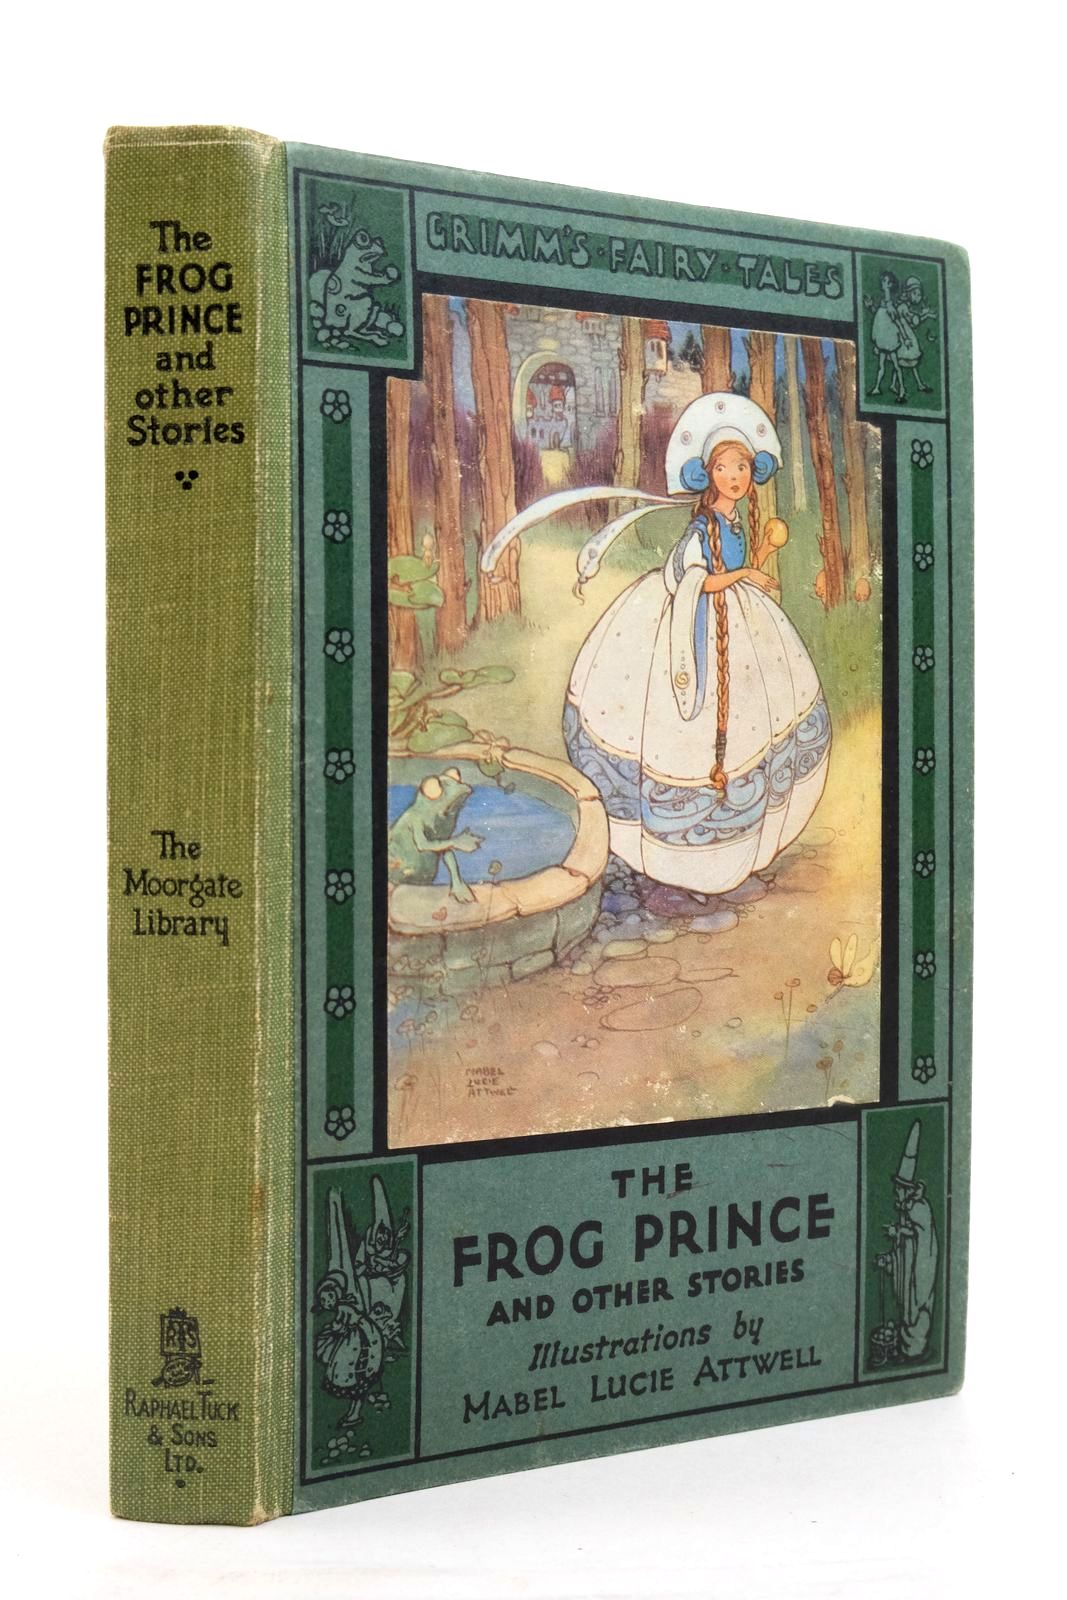 Photo of THE FROG PRINCE AND OTHER STORIES written by Grimm, Brothers illustrated by Attwell, Mabel Lucie published by Raphael Tuck & Sons Ltd. (STOCK CODE: 2137642)  for sale by Stella & Rose's Books